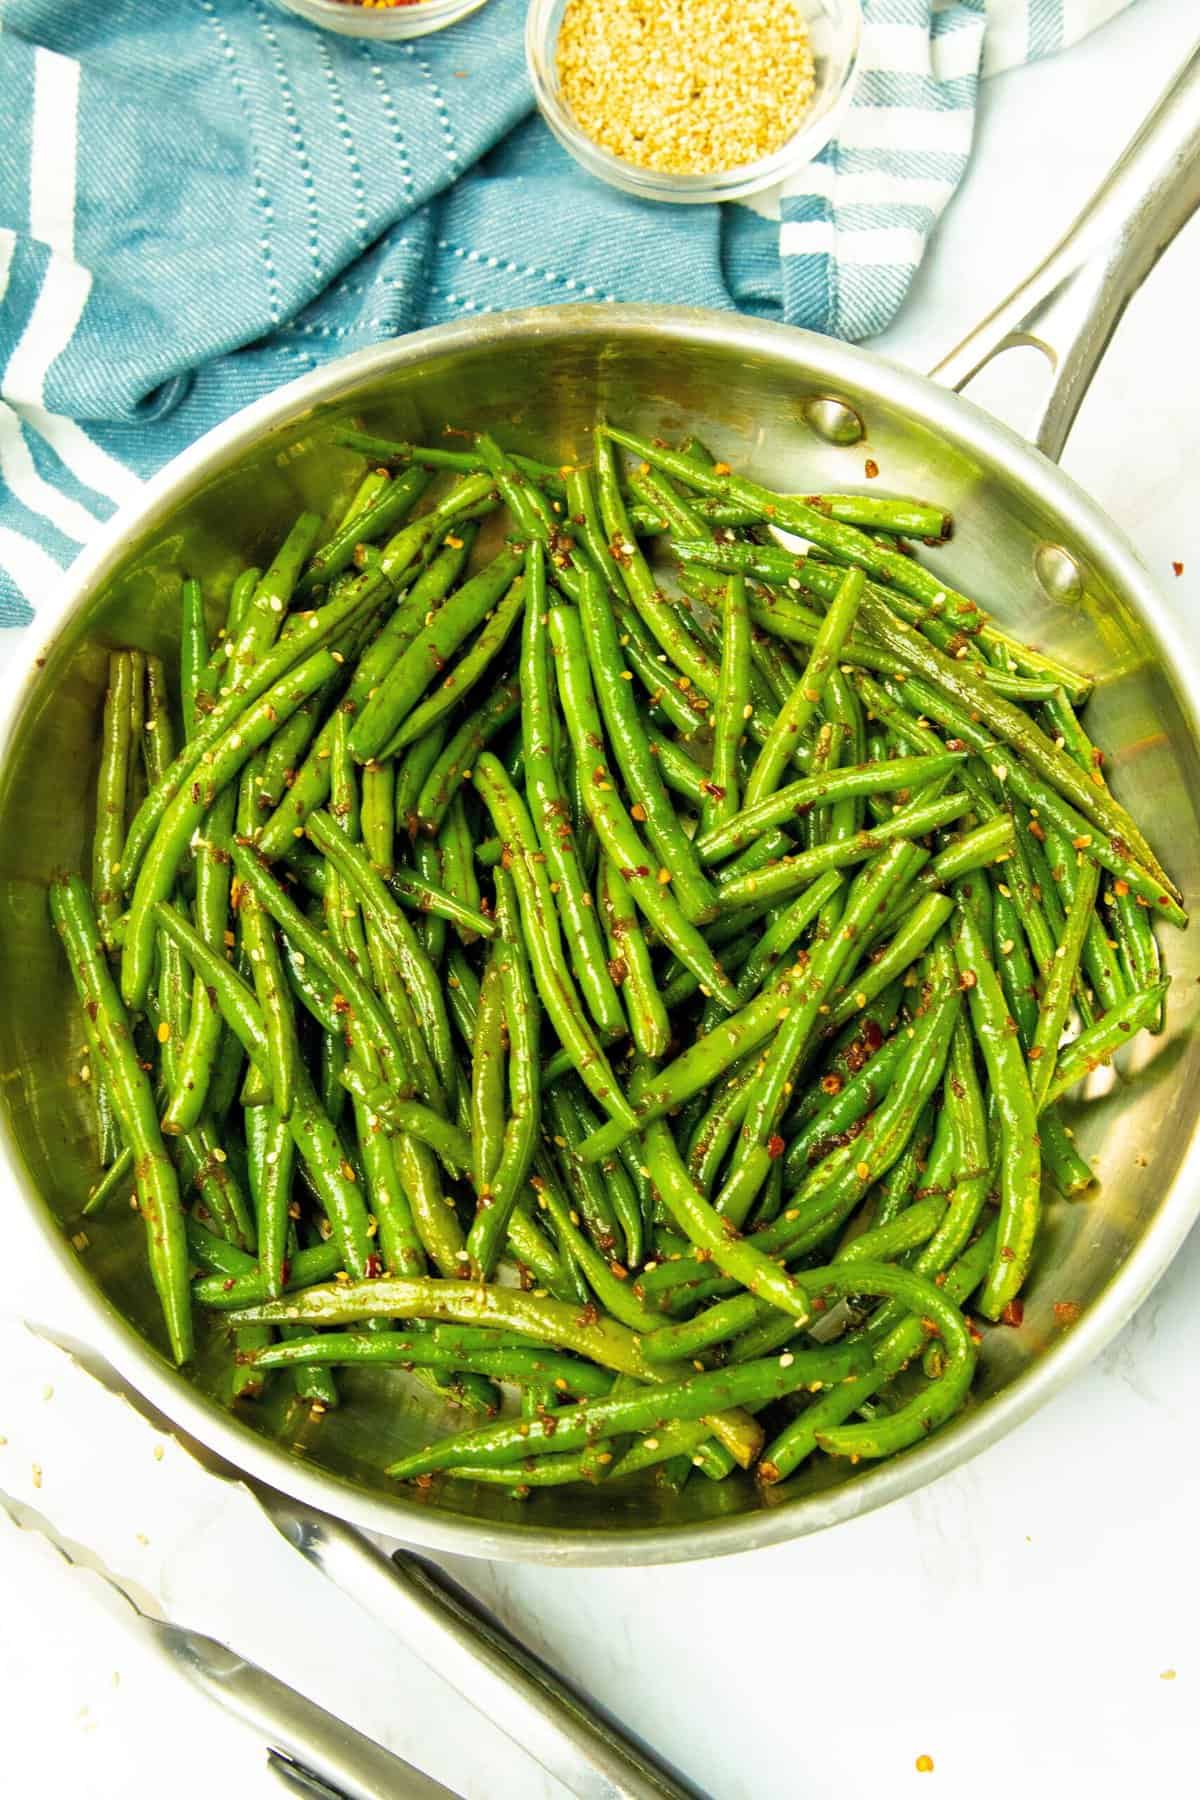 Spicy Green Beans fresh from the stove and ready to serve